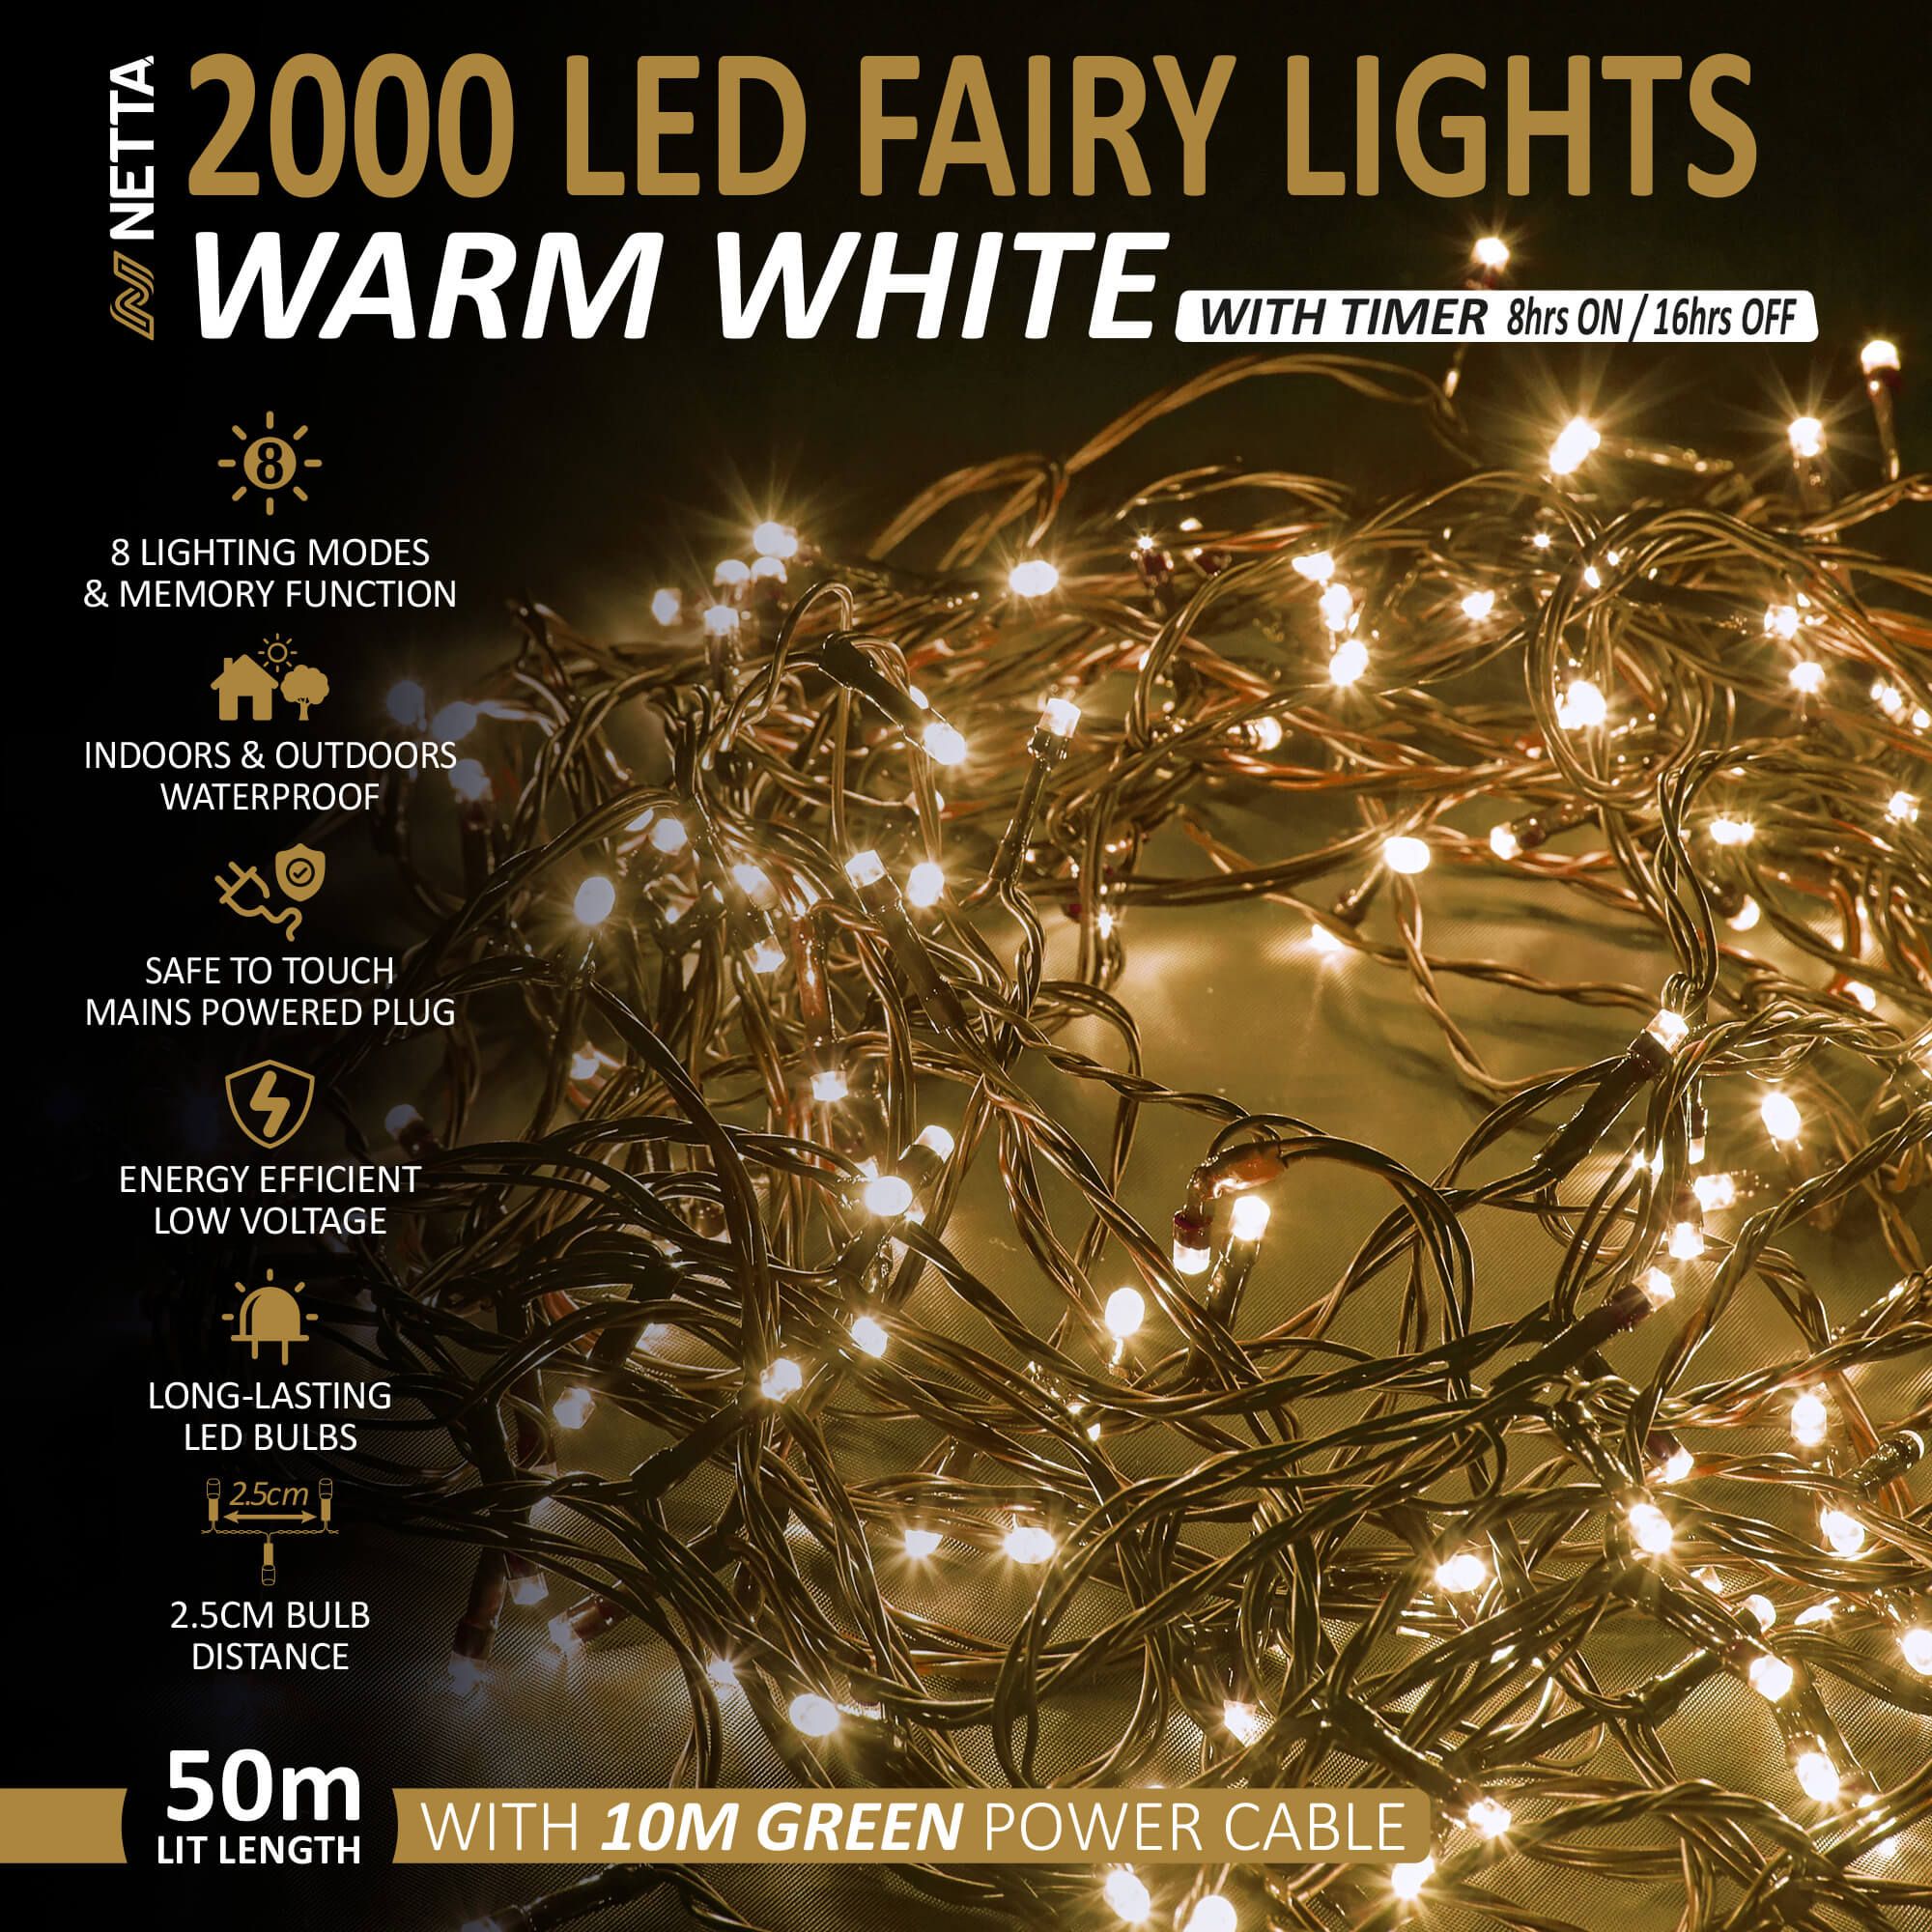 NETTA 2000 LED Fairy String Lights 50M Indoor & Outdoor Christmas Tree Lights Green Cable - Warm White